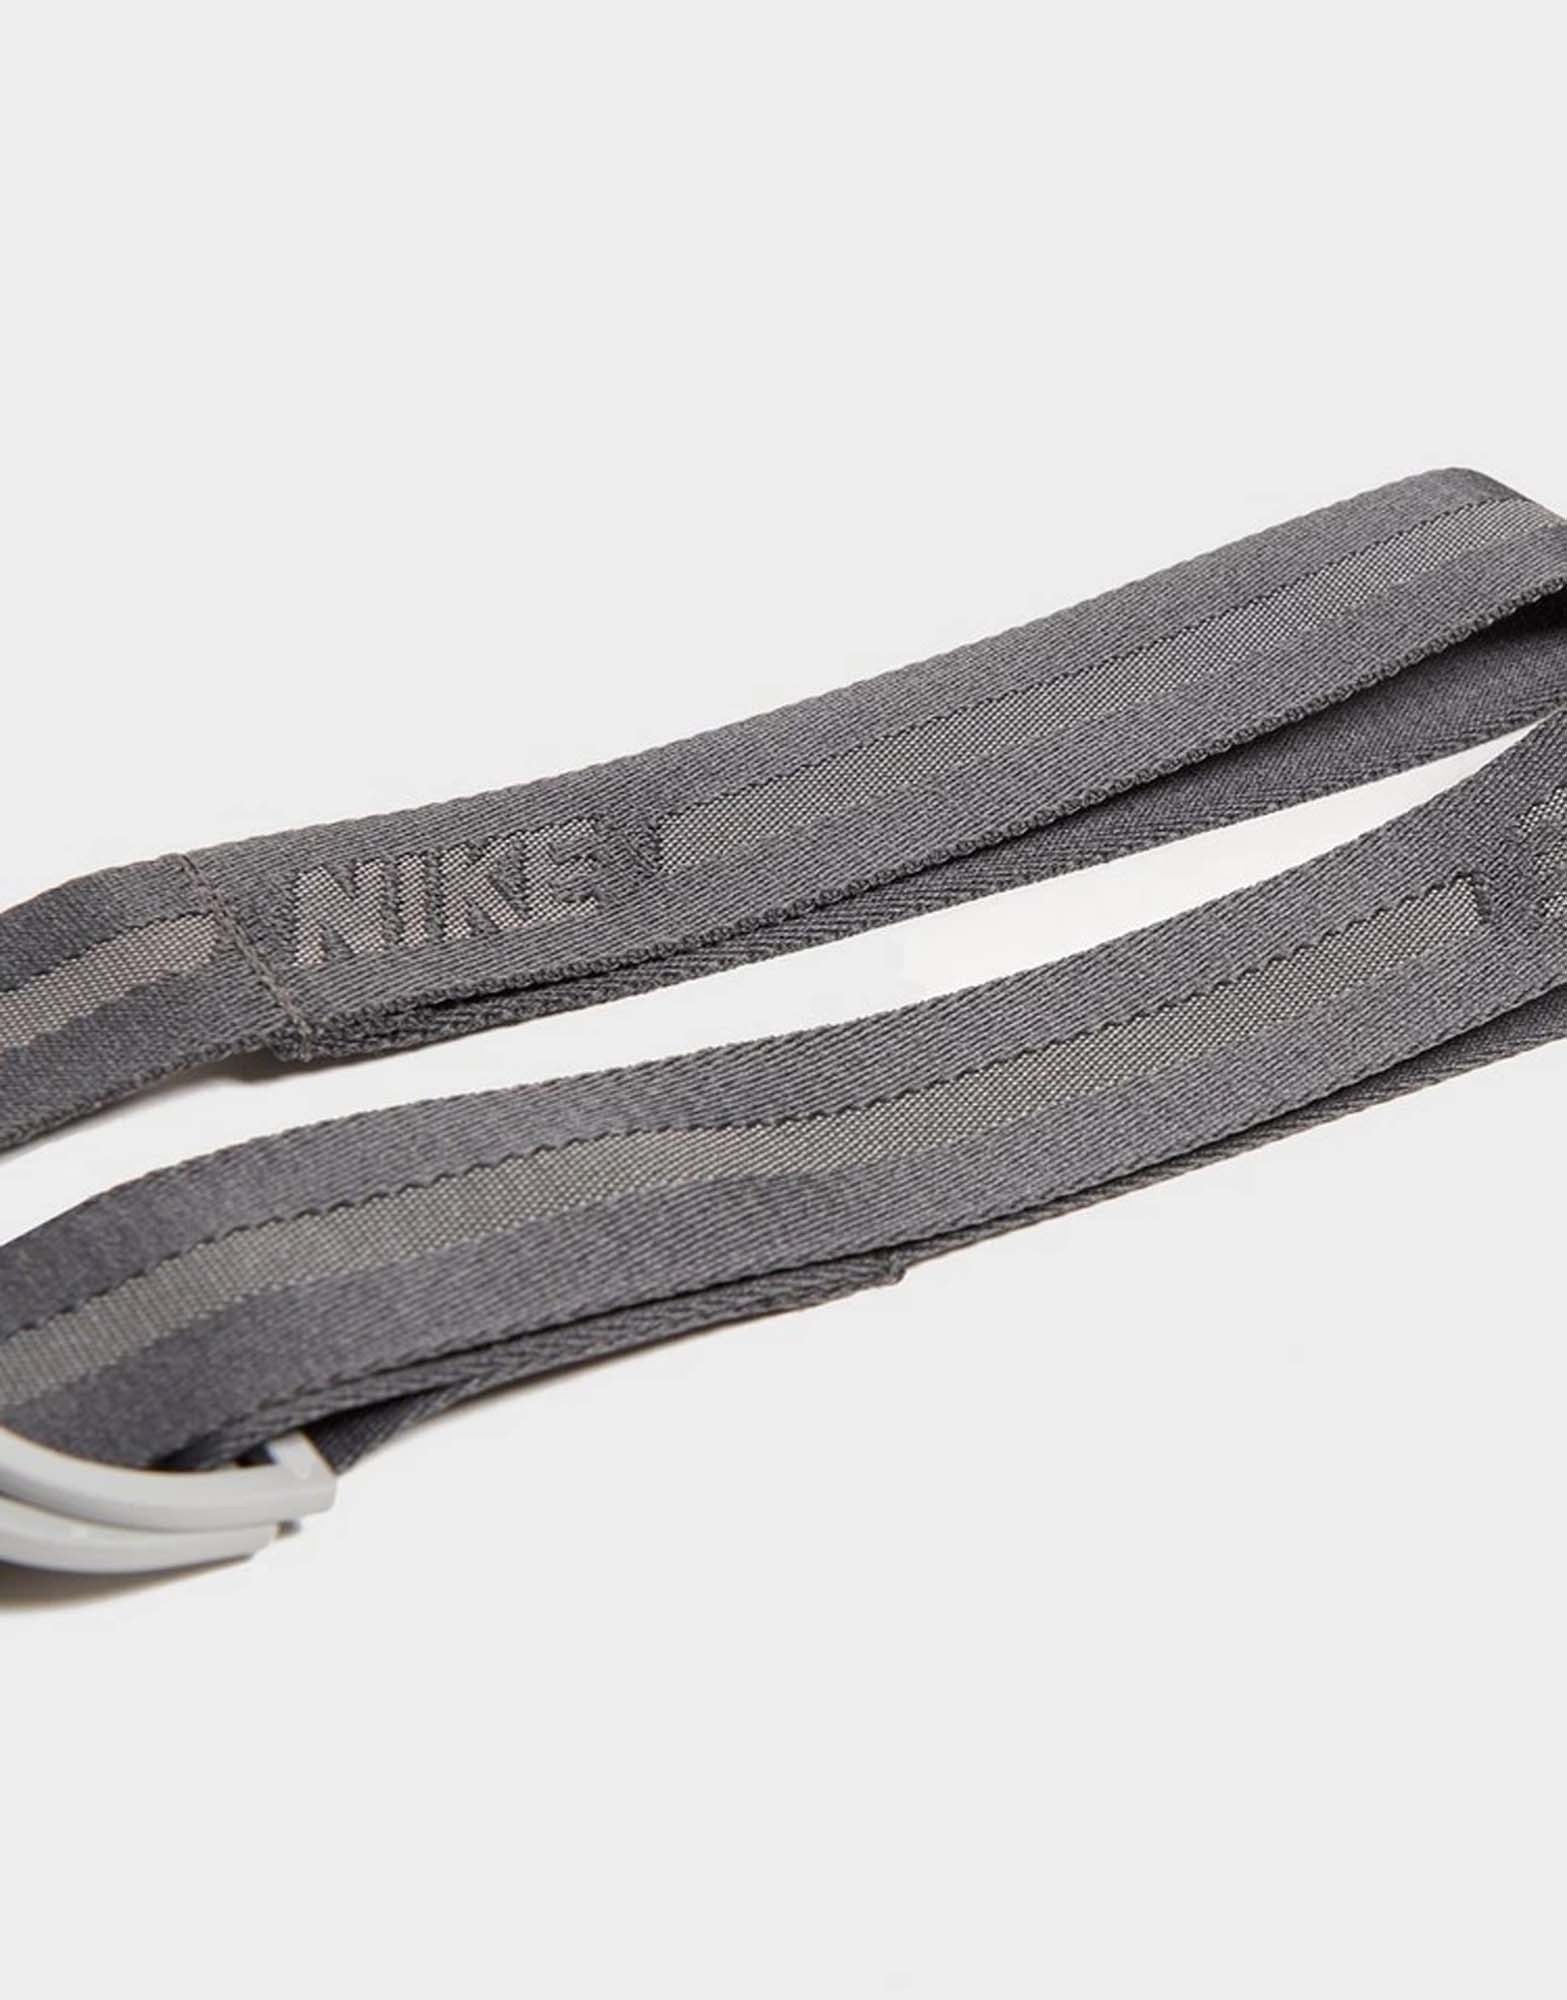 Nike accessoires nike yoga 2-in-1 strap 7ft